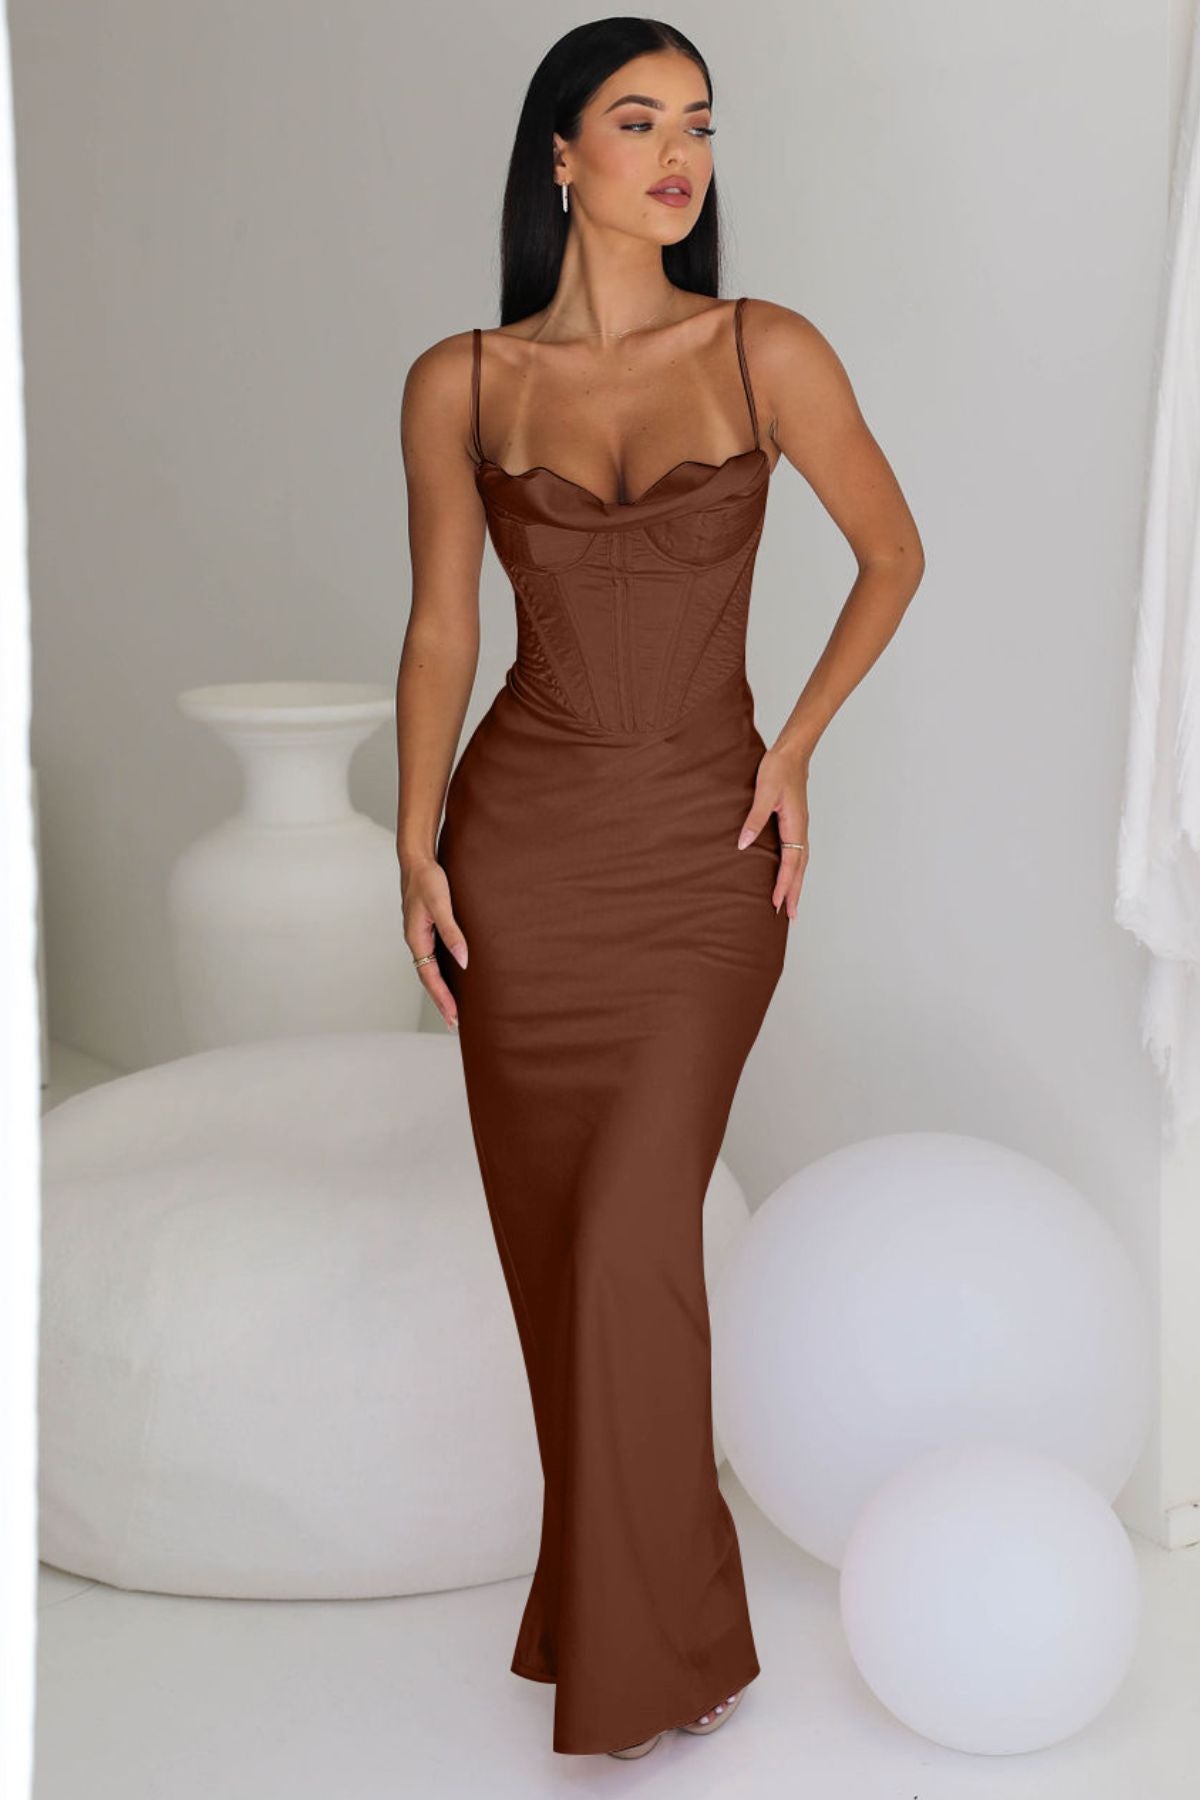 HOUSE OF CB Charmaine Corset Gown (Chocolate) - RRP $389